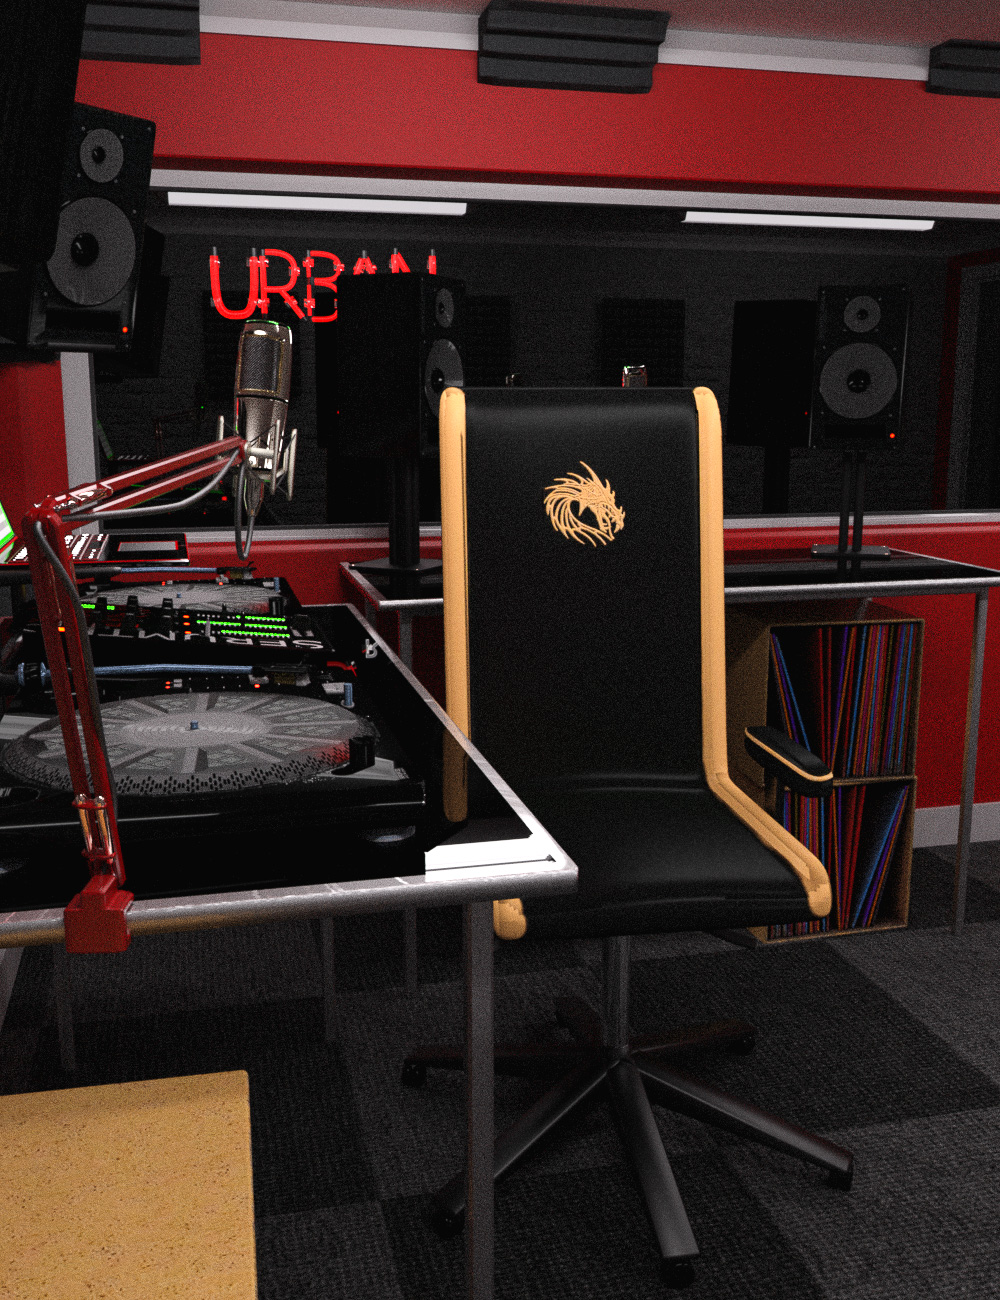 Urban Radio Station for Iray by: Serum, 3D Models by Daz 3D